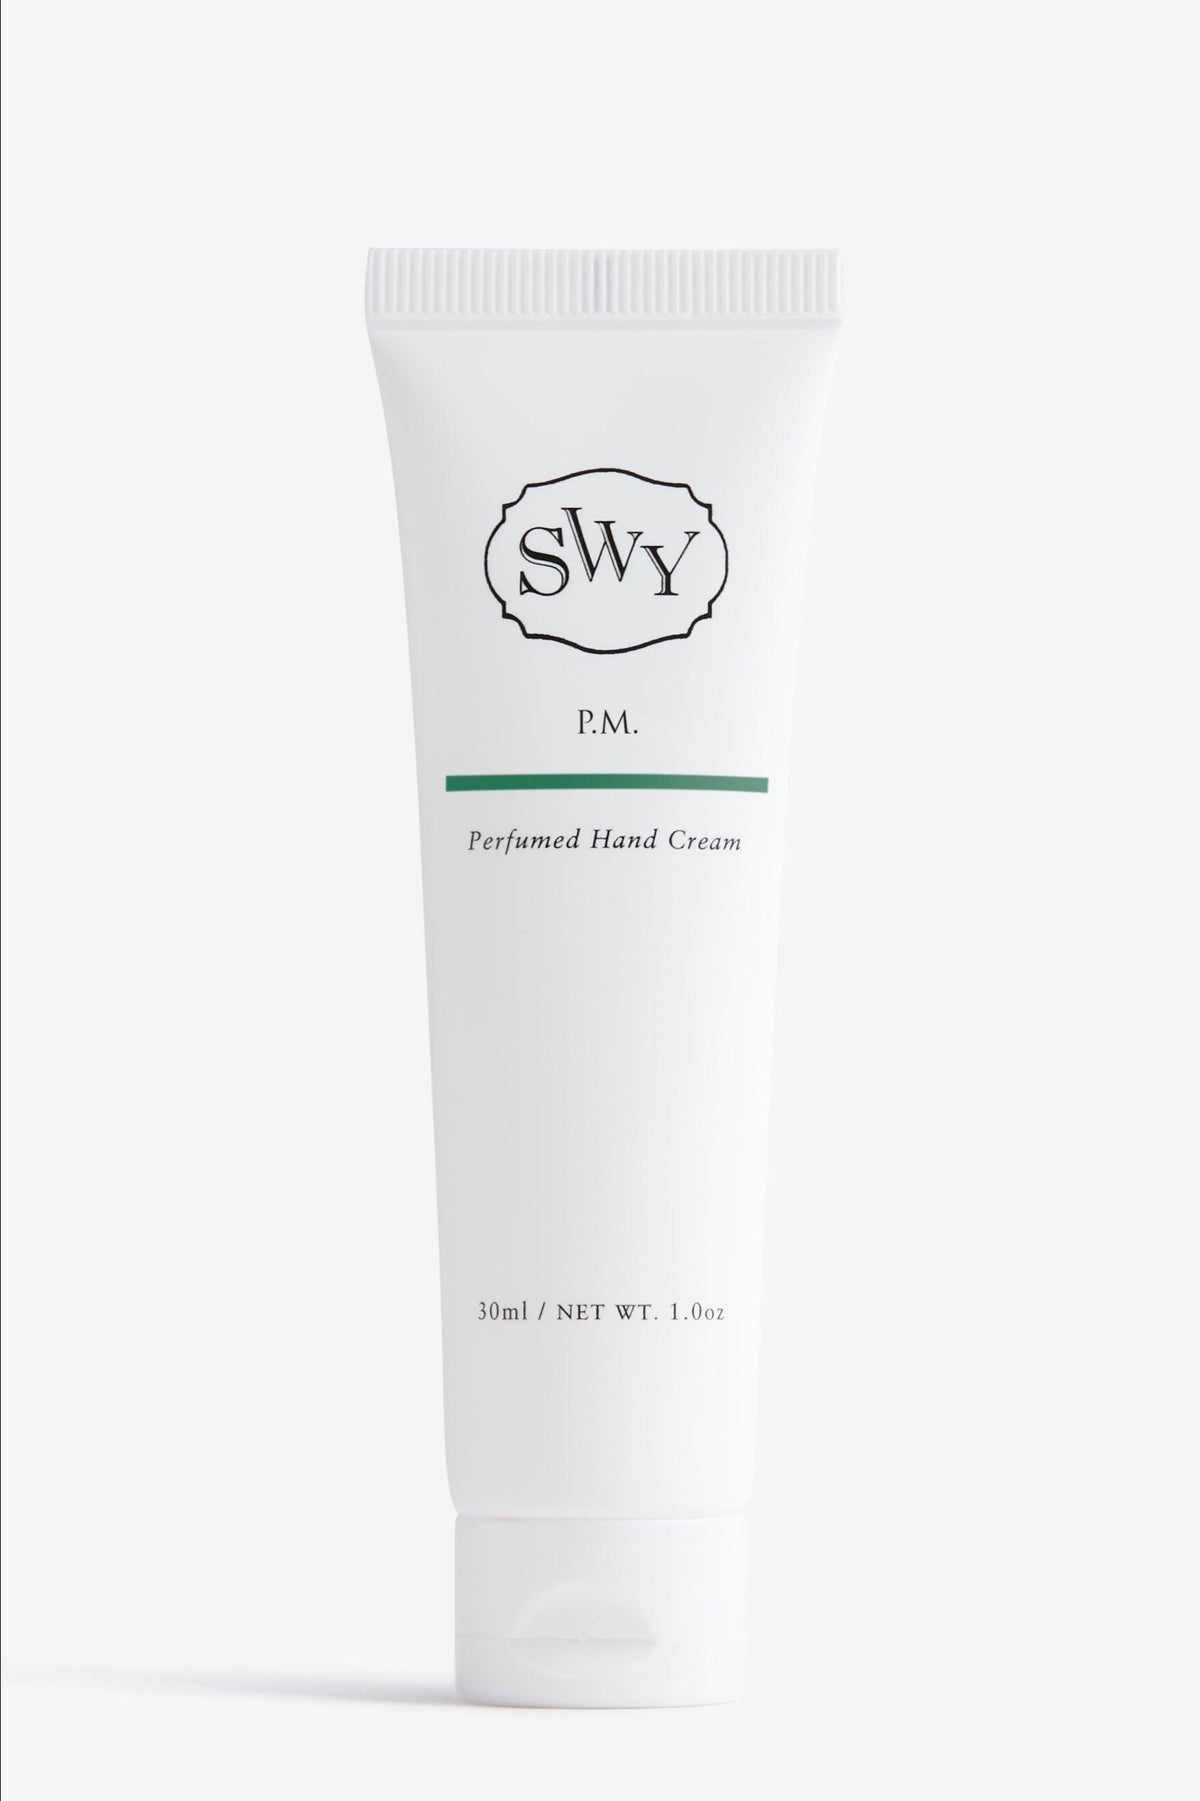 Hand Cream - pocket size - P.M. - SWY - Scent With You